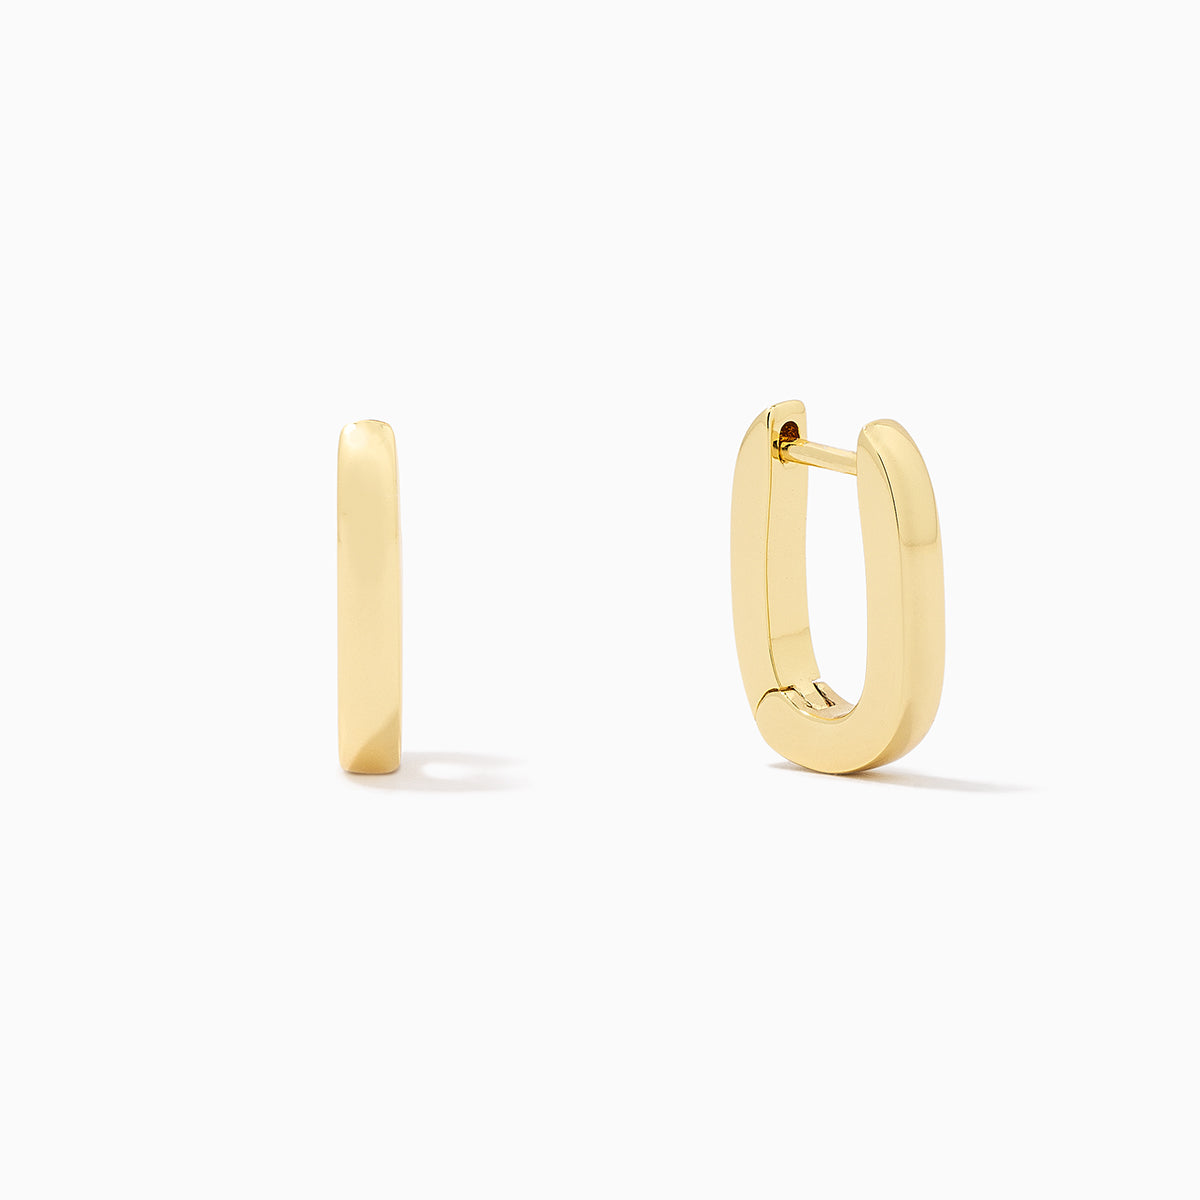 Oval Huggie Earrings | Gold | Product Image | Uncommon James